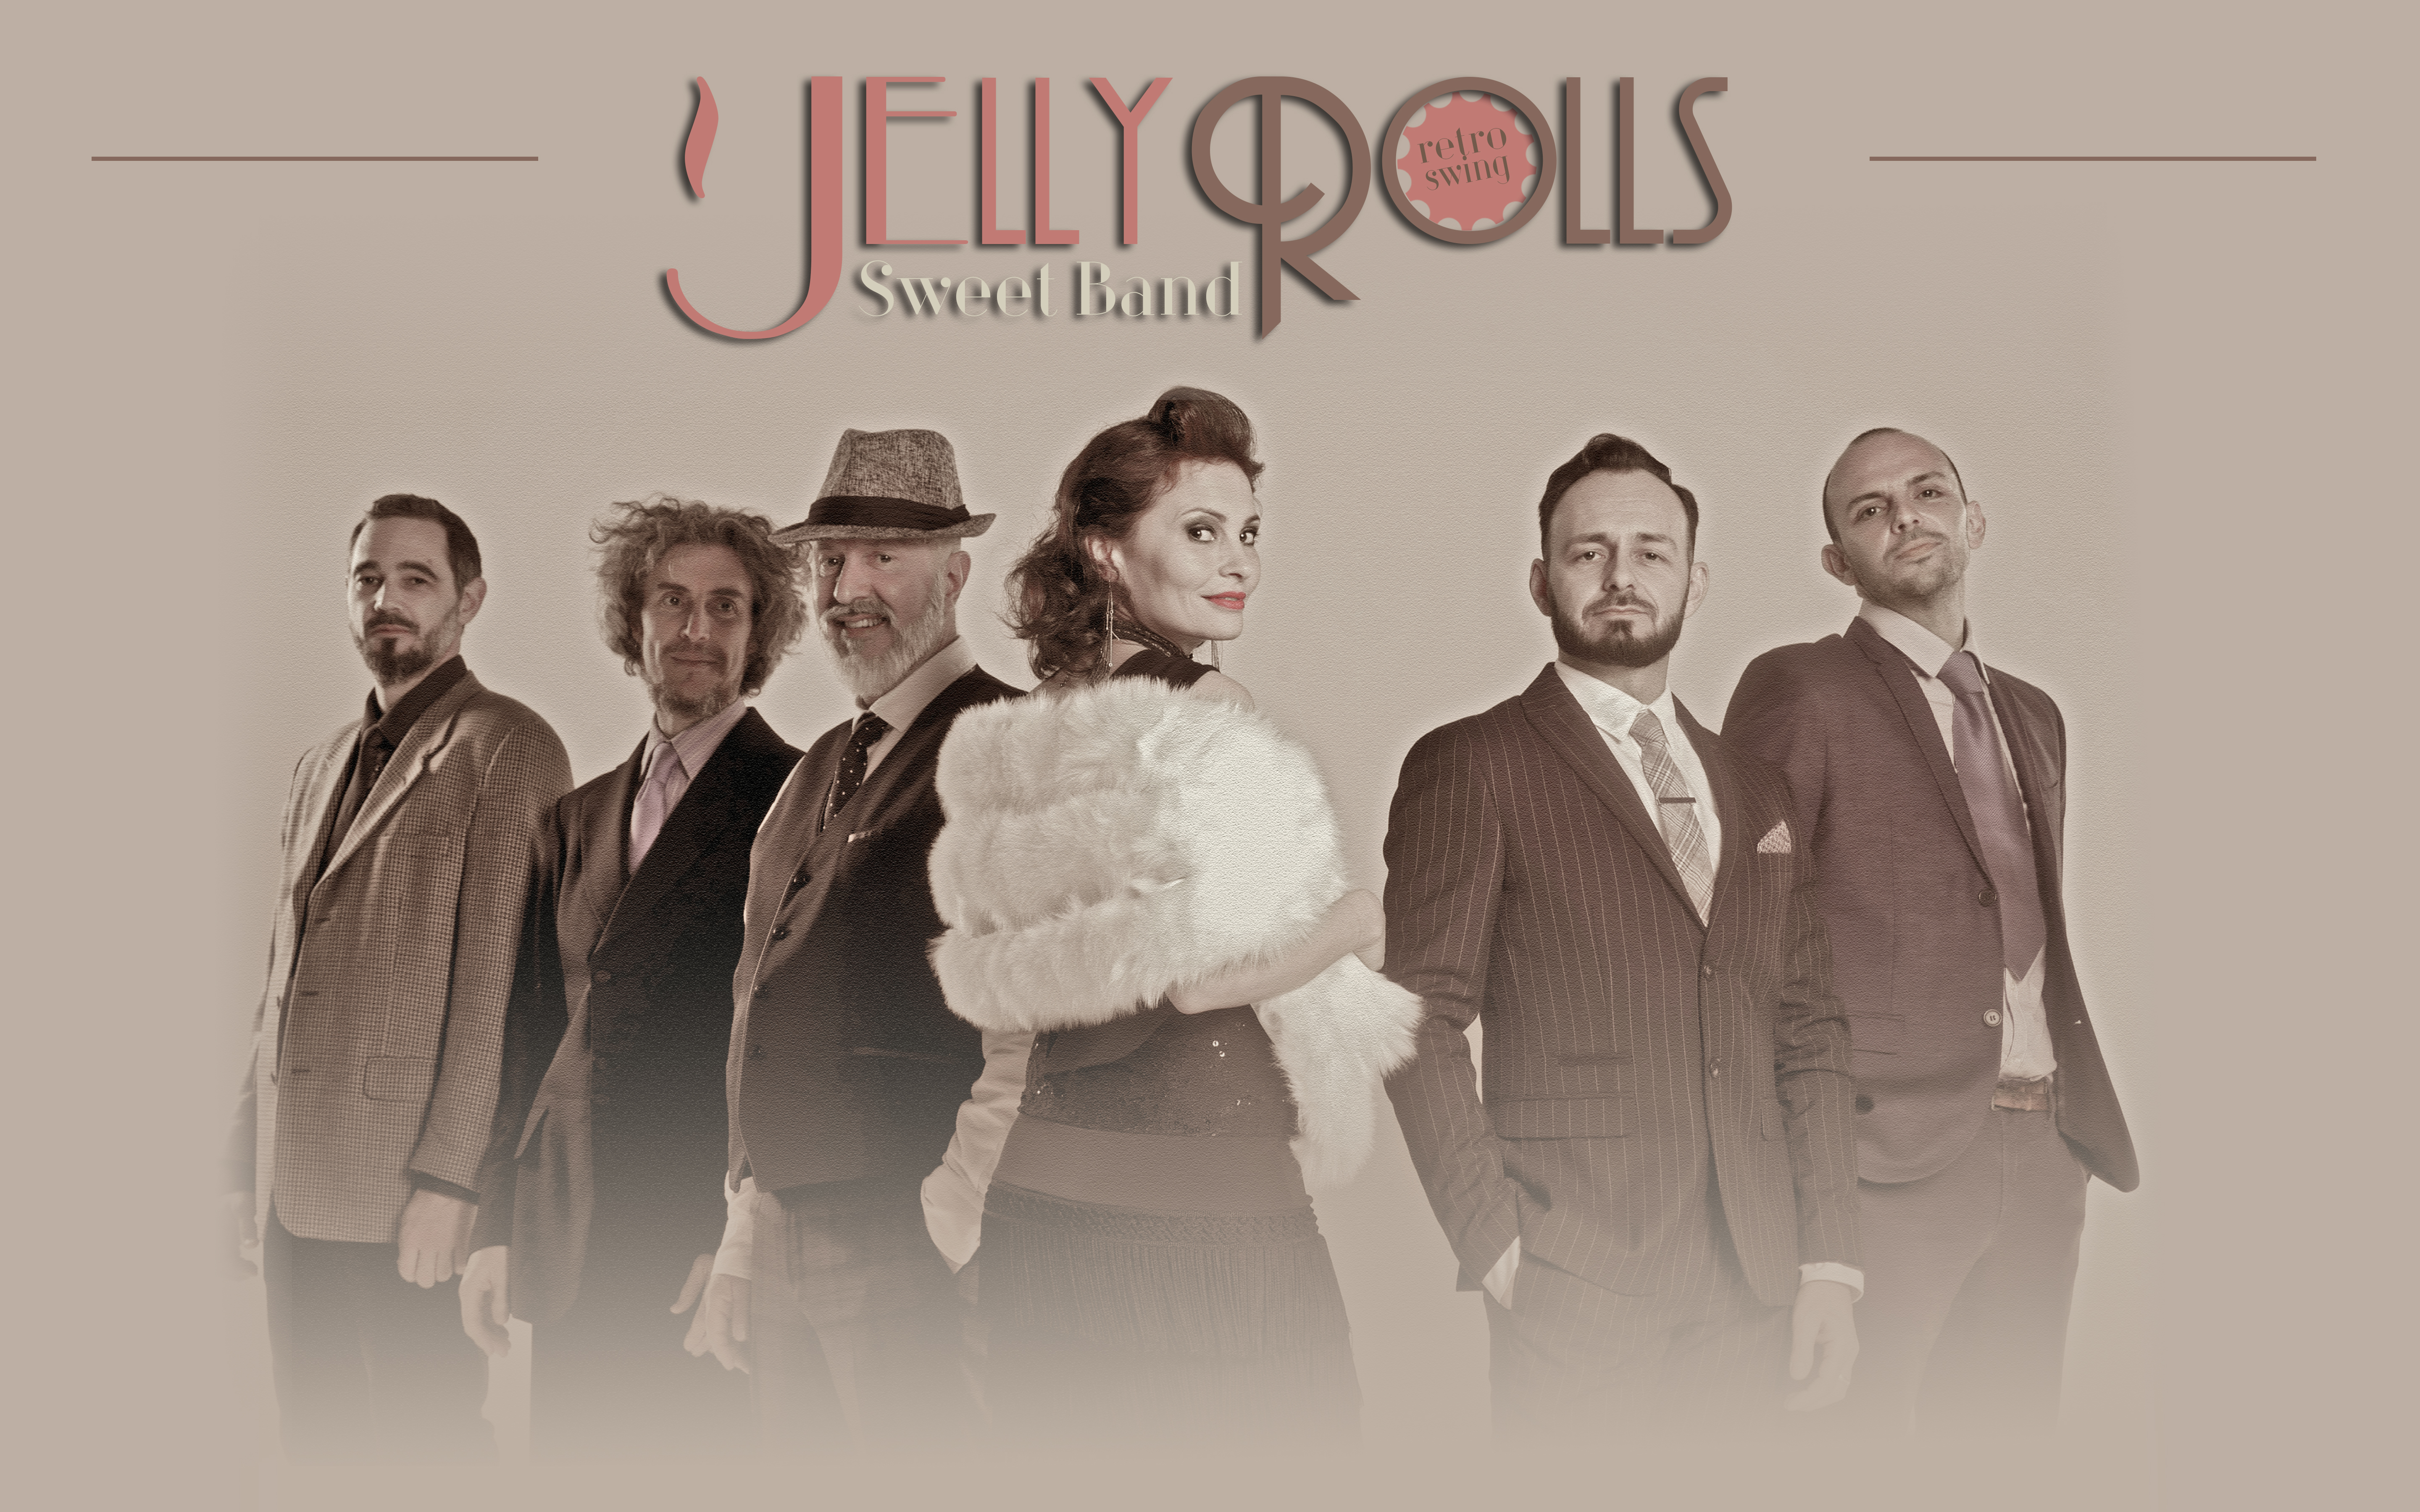 JELLY ROLLS SWEET BAND